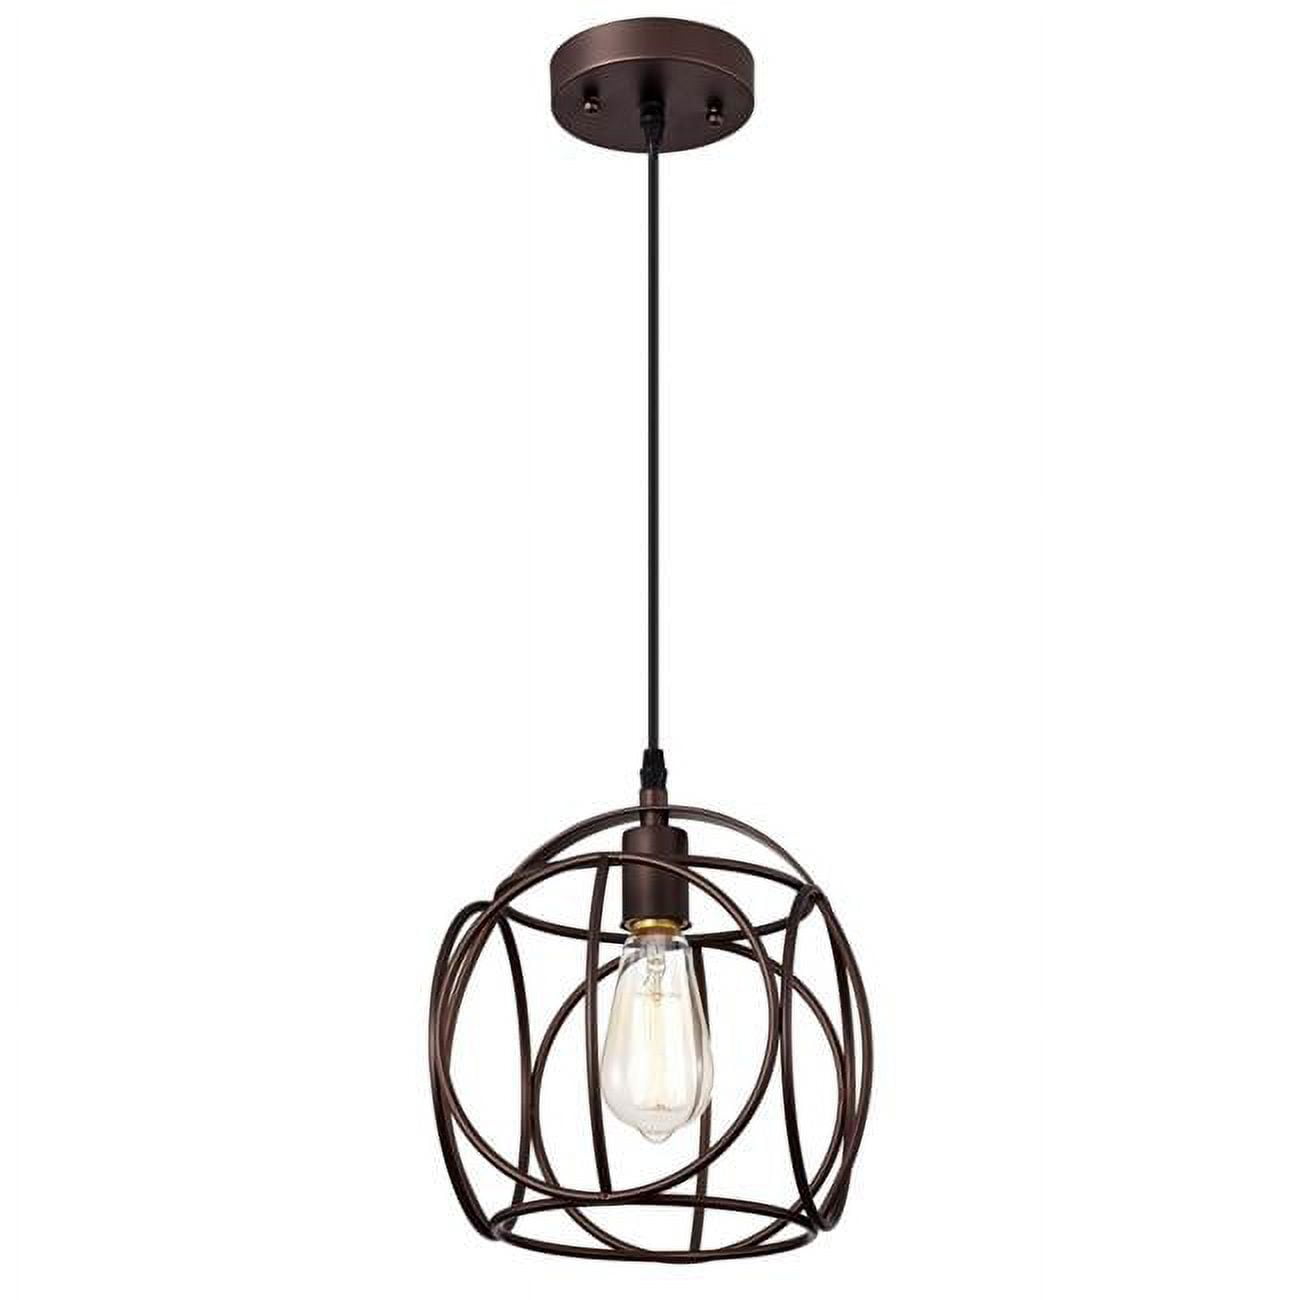 CH2D808RB10-DP1 10 in. Ironclad Industrial 1 Light Mini Pendant Ceiling Fixture, Oil Rubbed Bronze -  CHLOE Lighting